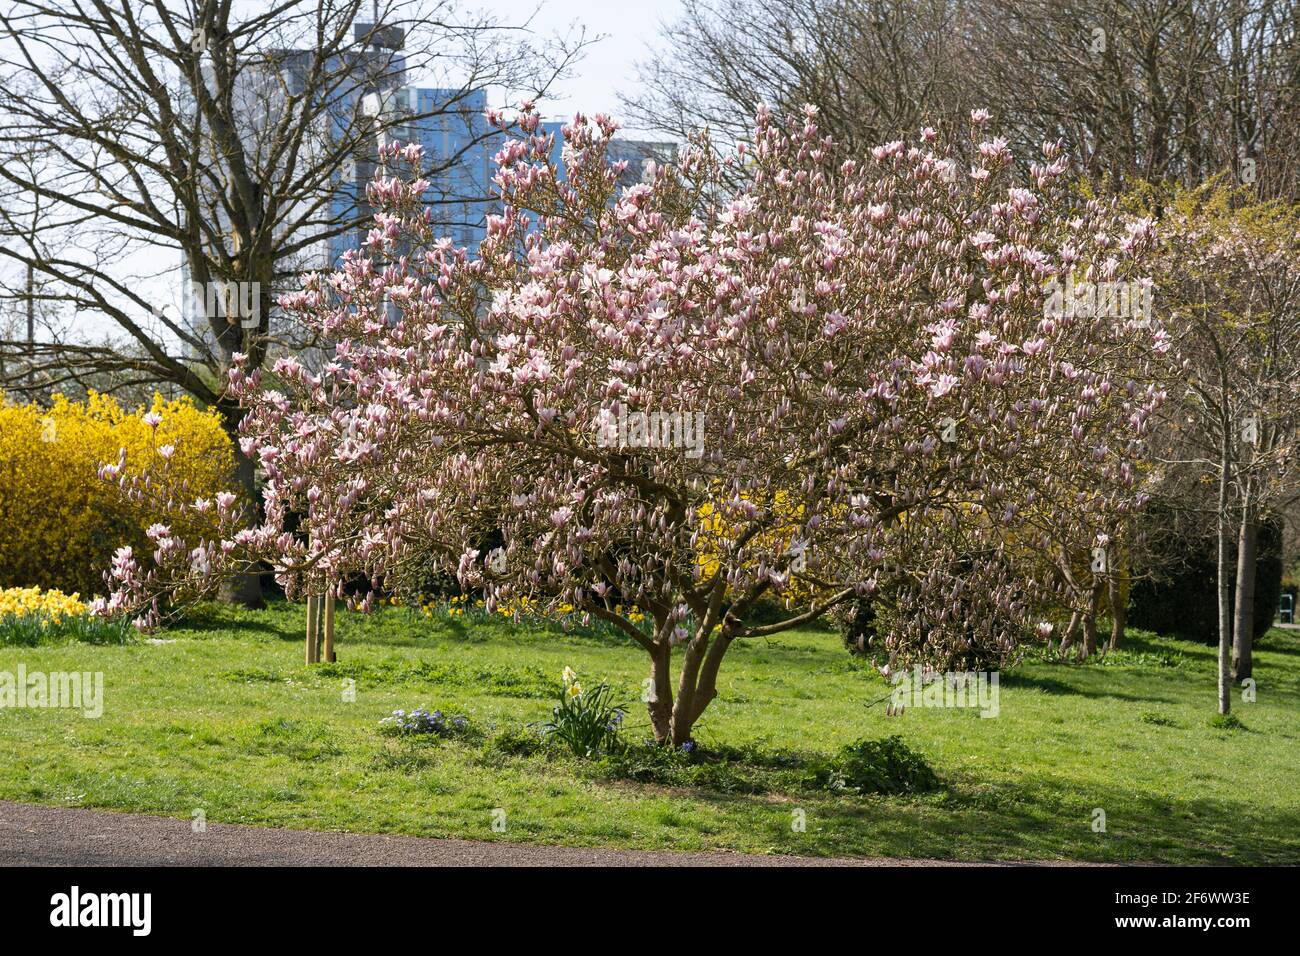 A Magnolia sieboldii (or Chinese magnolia) flowering in late March in Eastrop Park with Churchill Place in the background. Basingstoke, UK Stock Photo